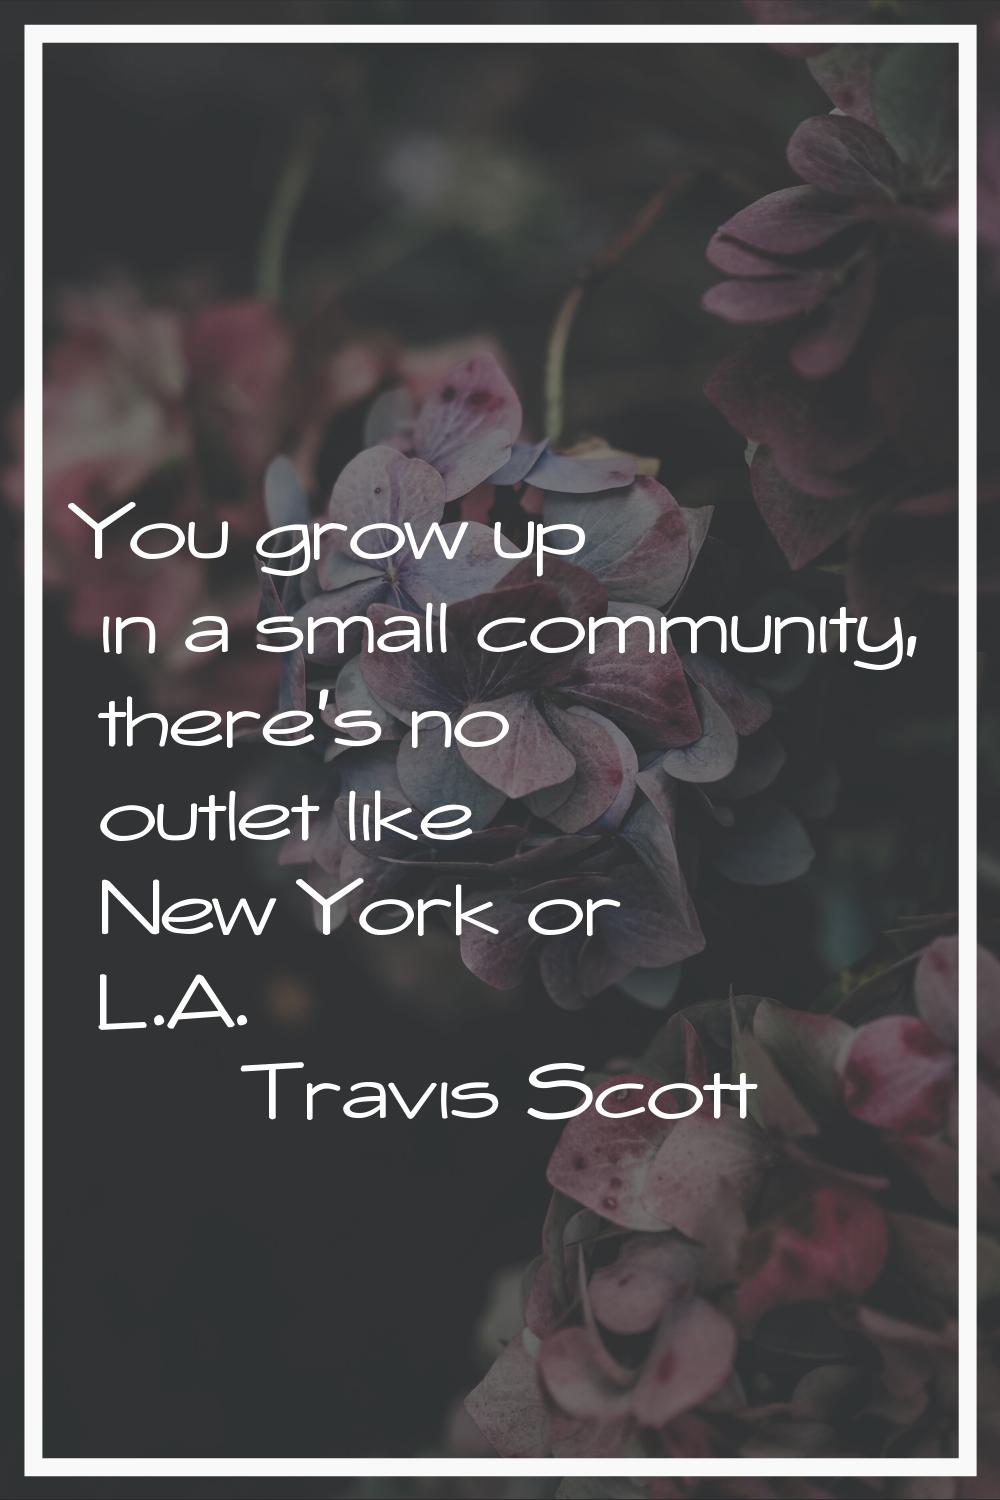 You grow up in a small community, there's no outlet like New York or L.A.